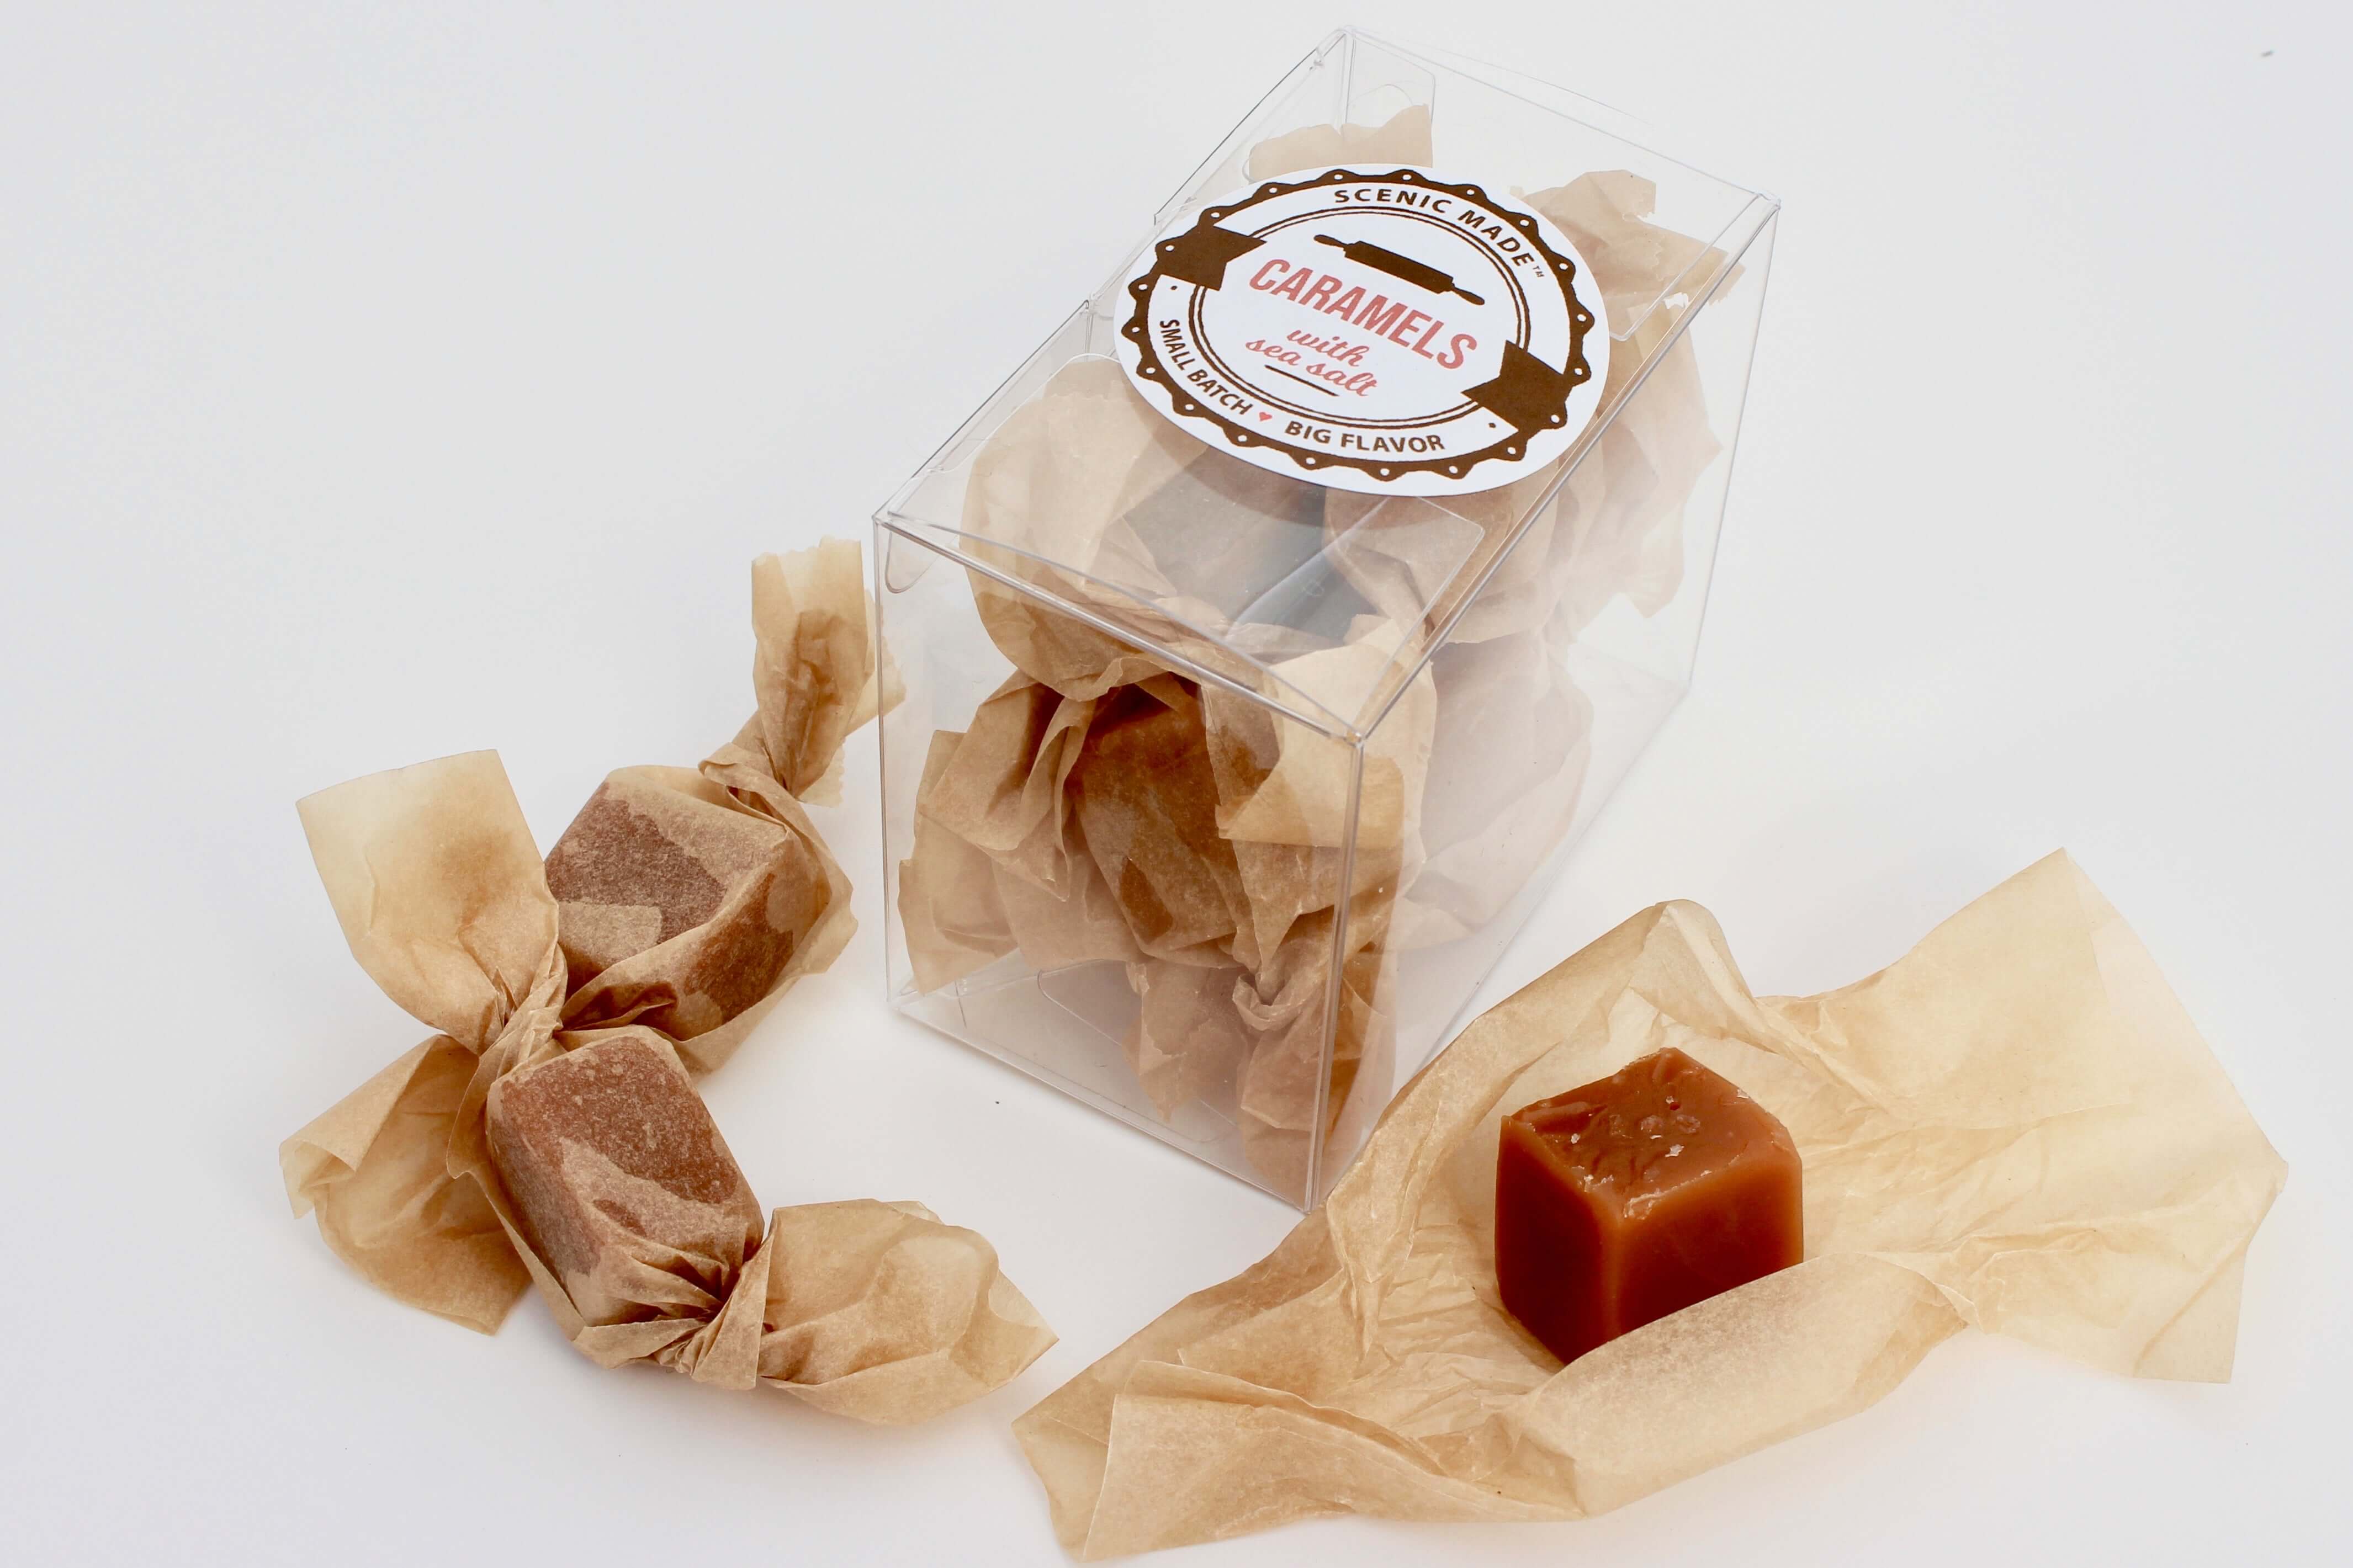  Sweet, chewy caramels, individually wrapped in unbleached parchment paper. 8 homemade caramels, individually wrapped and packaged in a clear, rectangular, food safe container with an attractive label on the front.